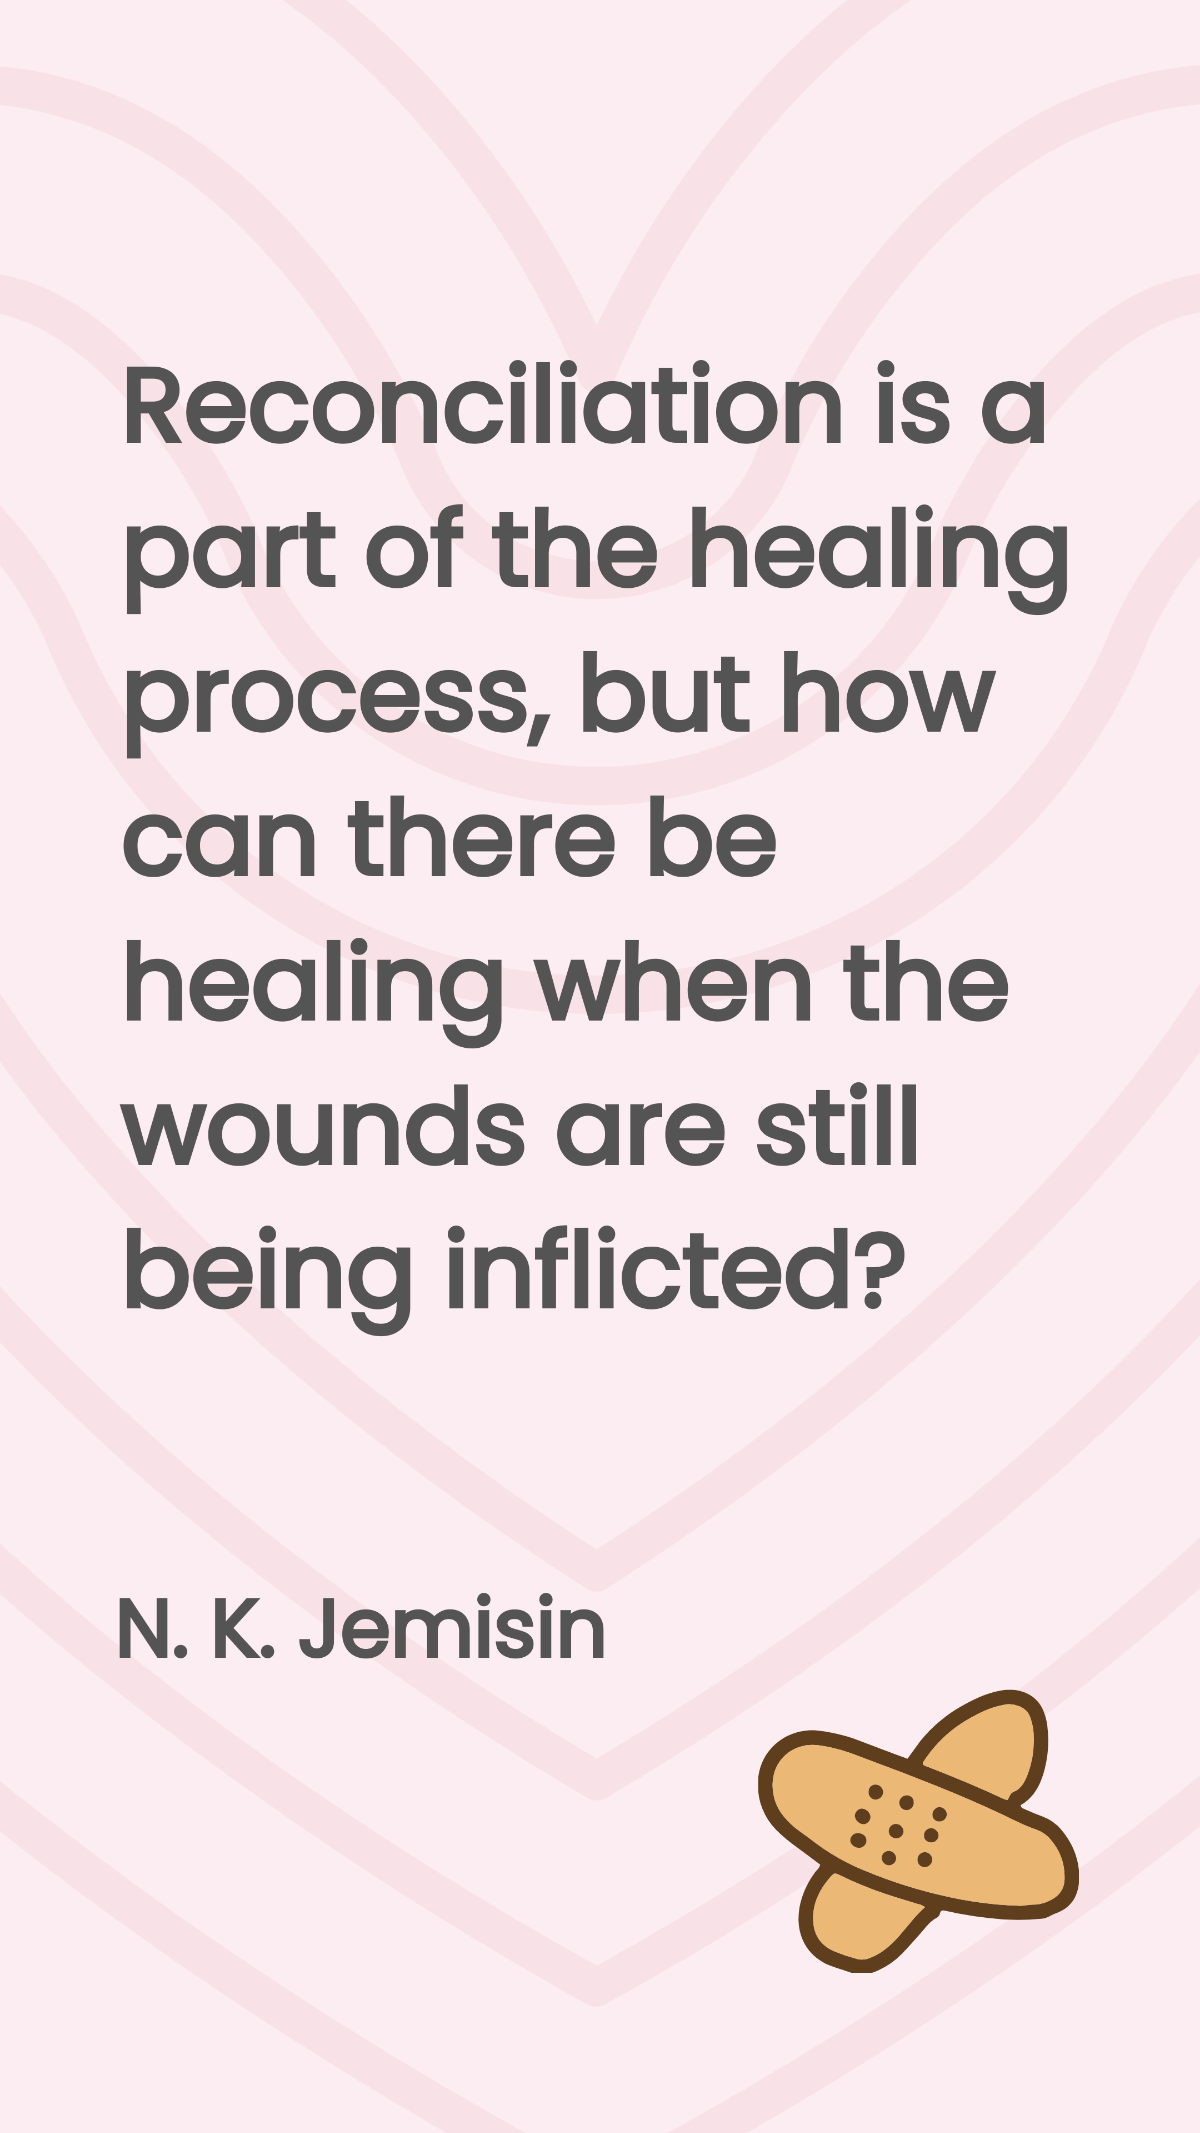 N. K. Jemisin - Reconciliation is a part of the healing process, but how can there be healing when the wounds are still being inflicted?